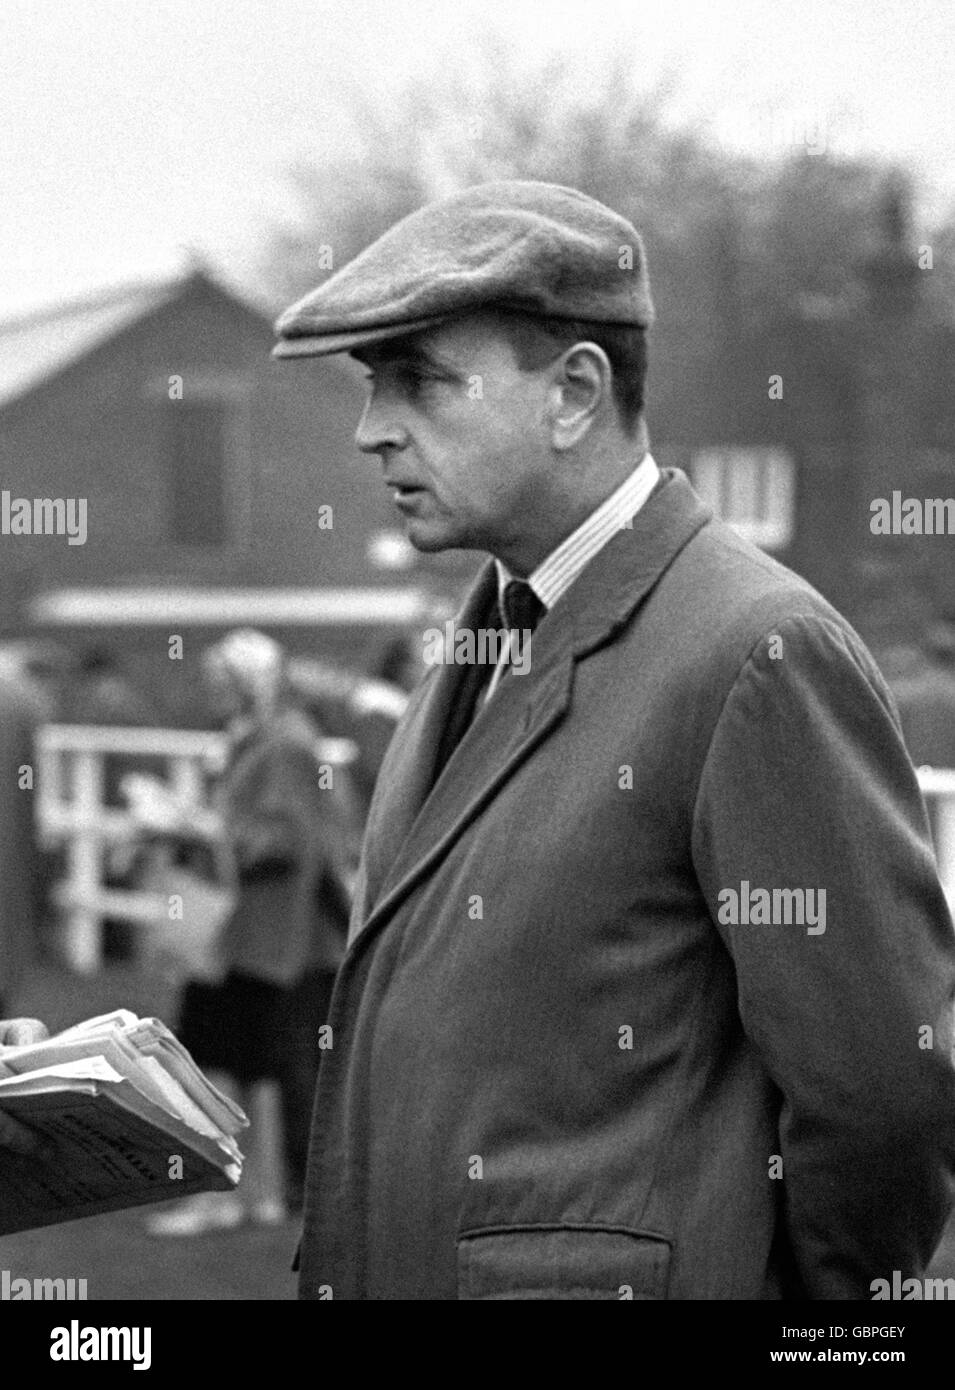 Horse Racing - Houghton Yearling Sales - Park Paddocks - Newmarket. Horse breeder and owner Arthur Budgett at the Houghton Yearling Sales at Newmarket. Stock Photo